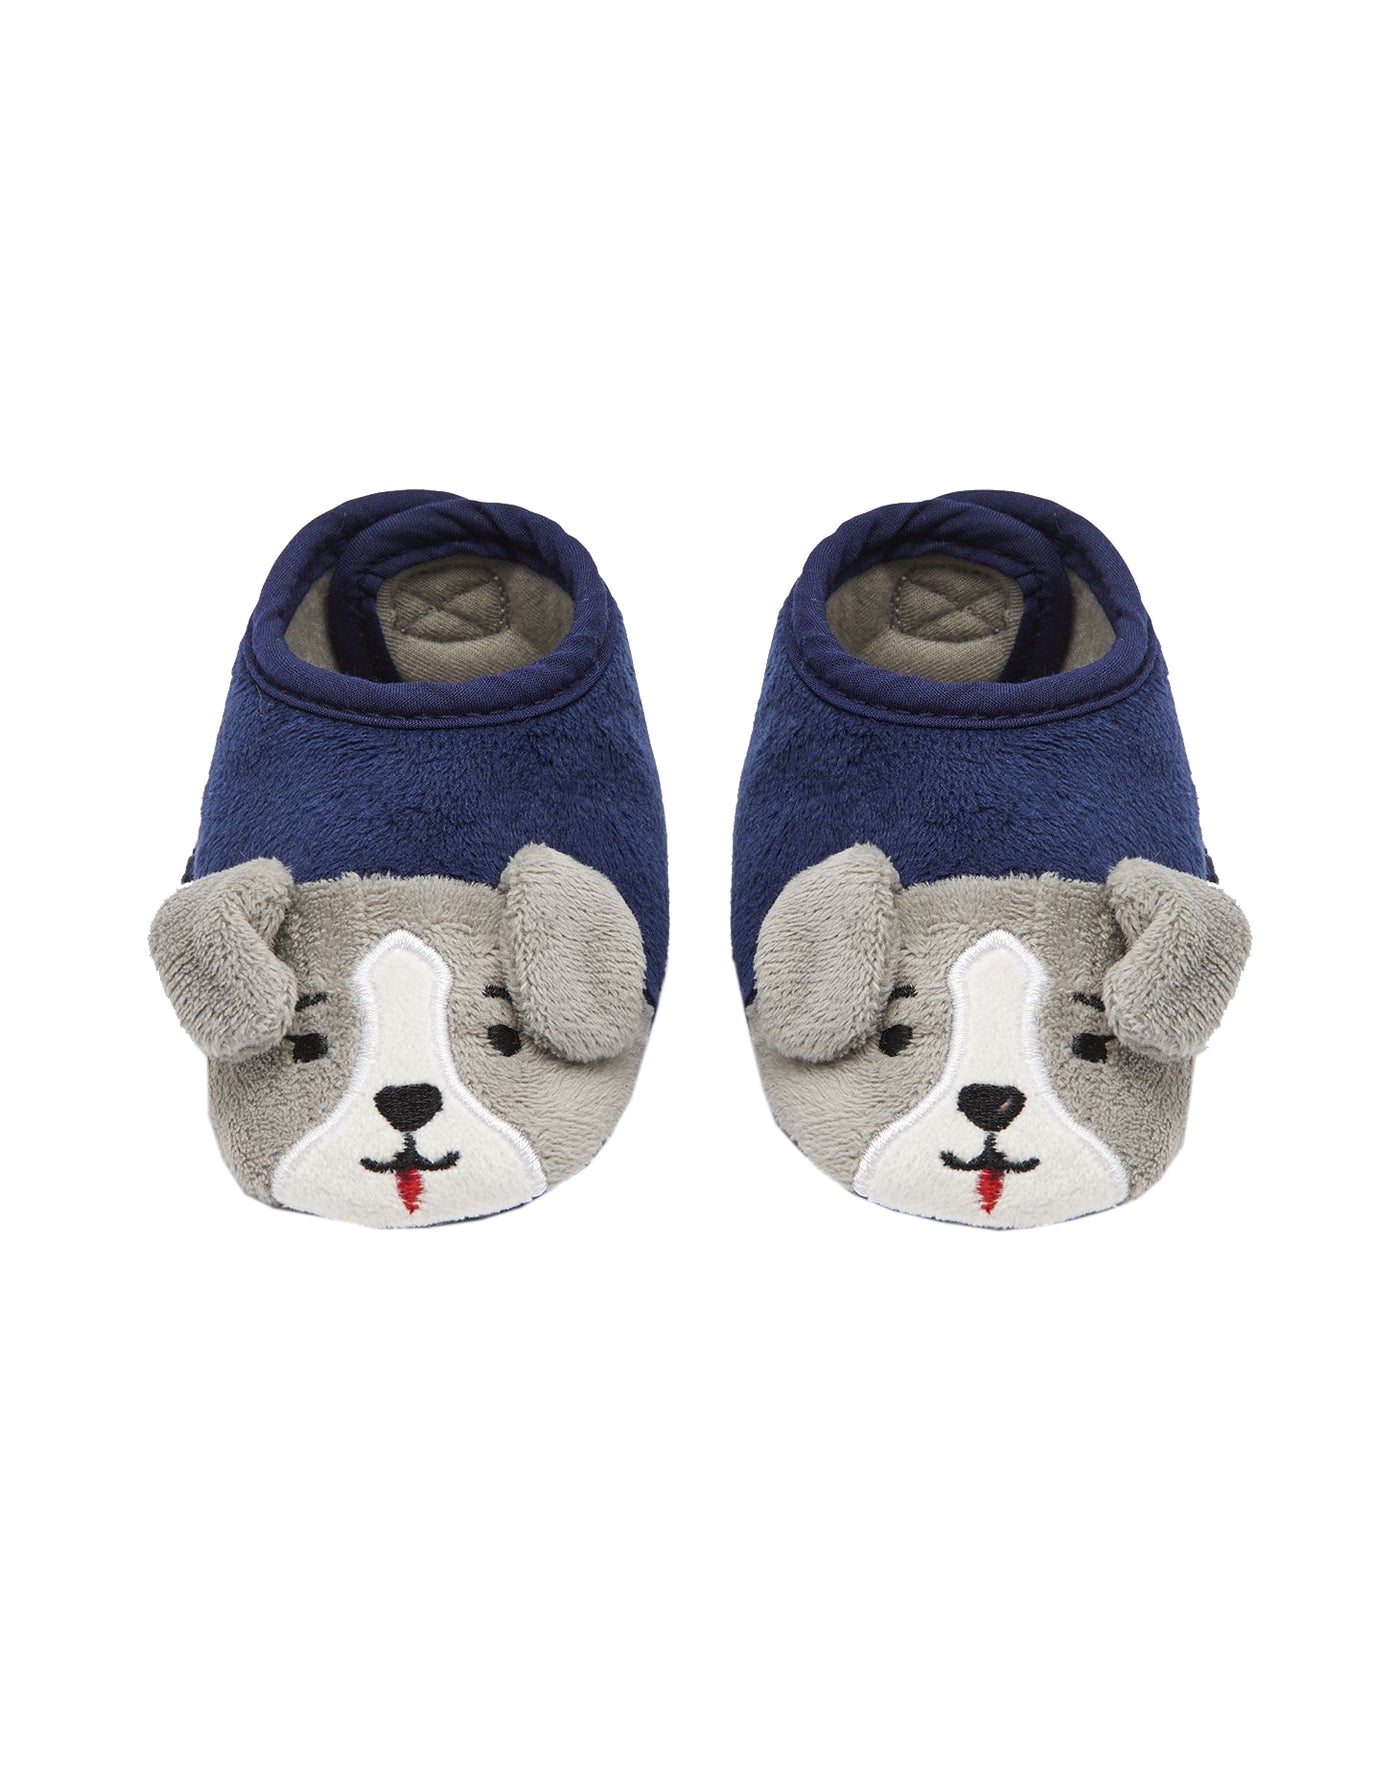 Joules Baby Character Slippers - Dog